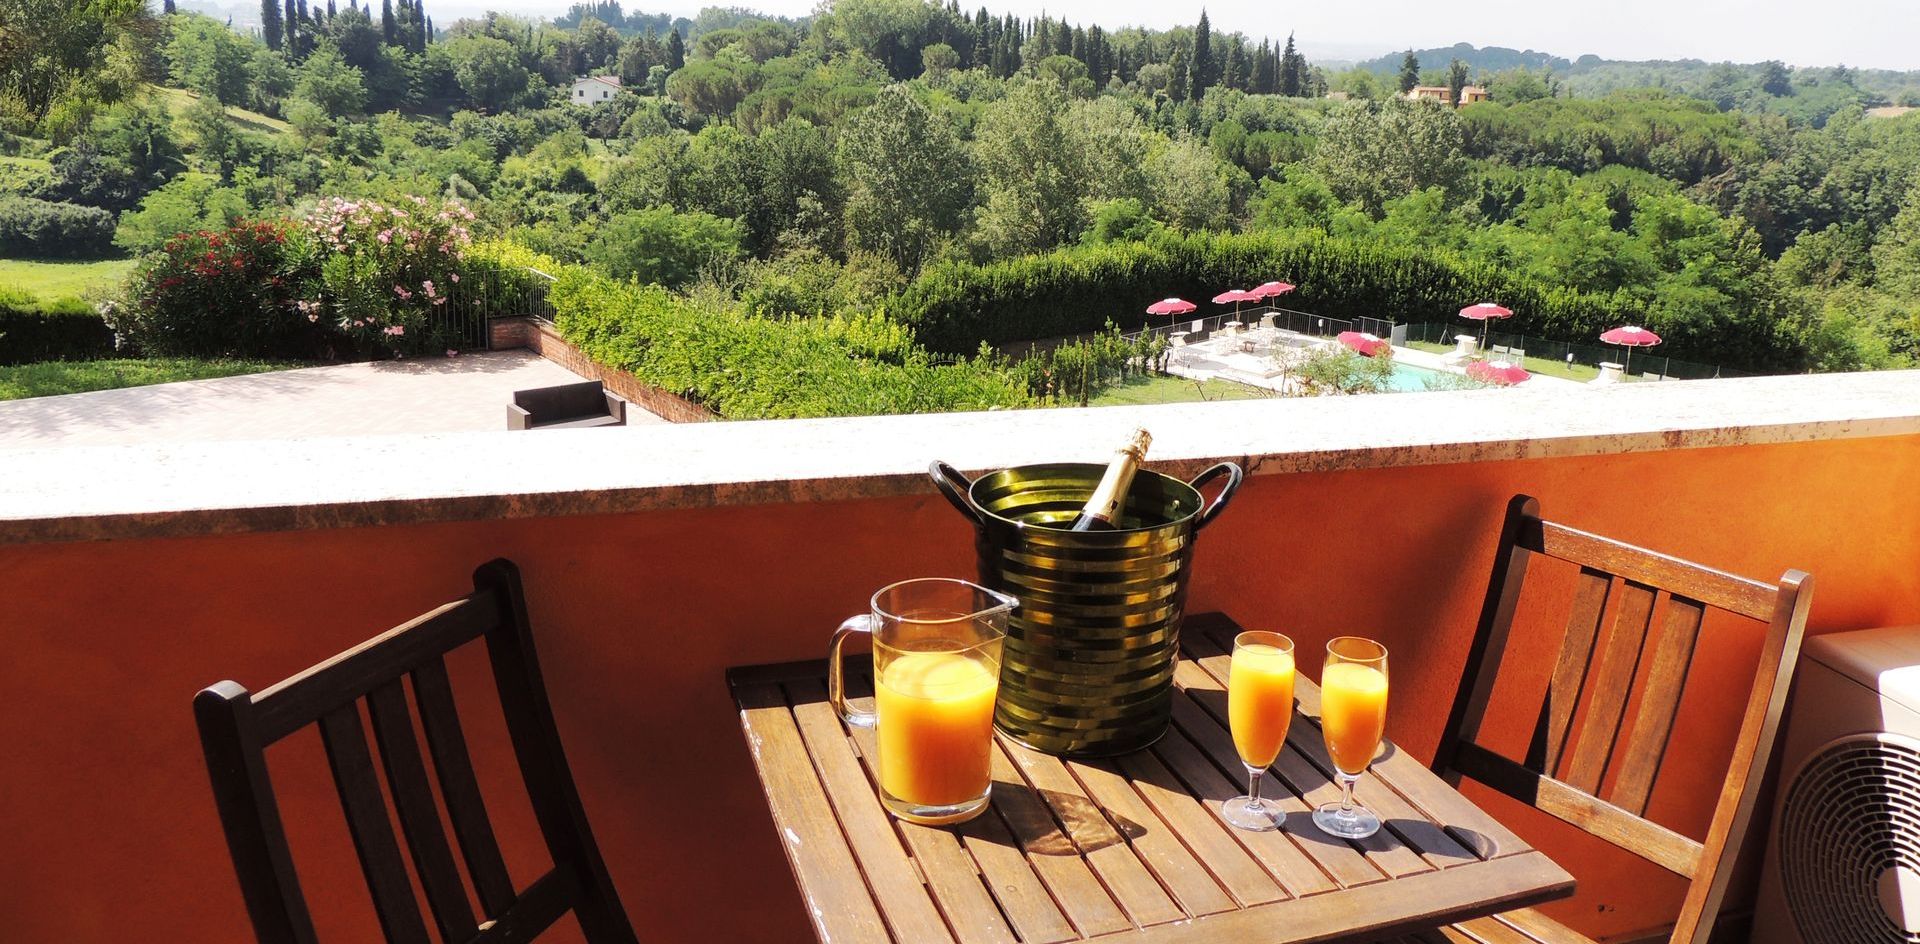 A holiday overlooking the iconic Tuscan landscape<br>-with all the comforts-